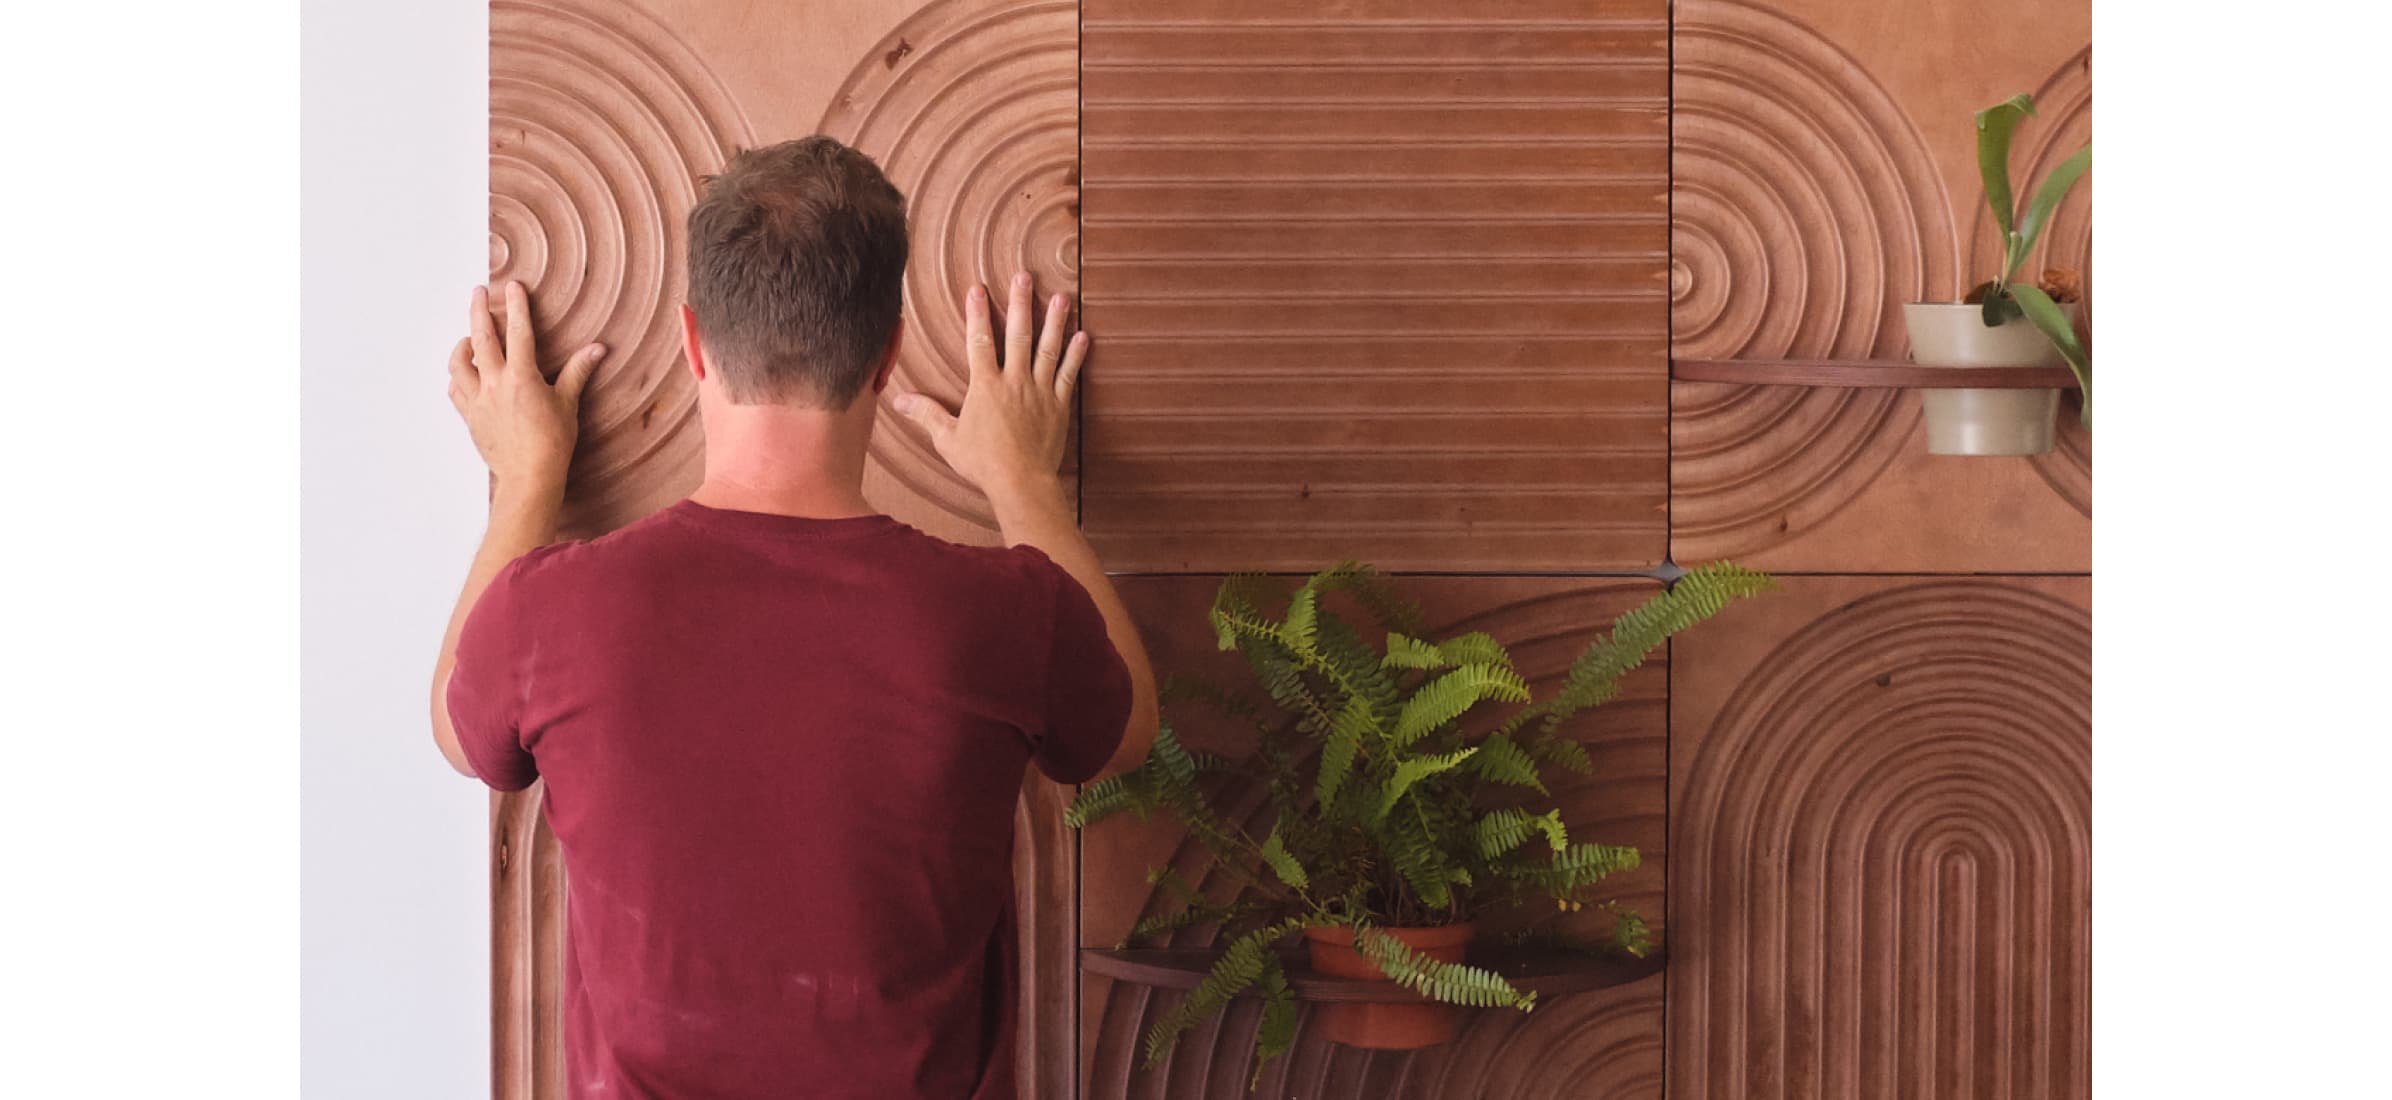 Aaron installing the last of six patterned terracotta panels onto a wall.